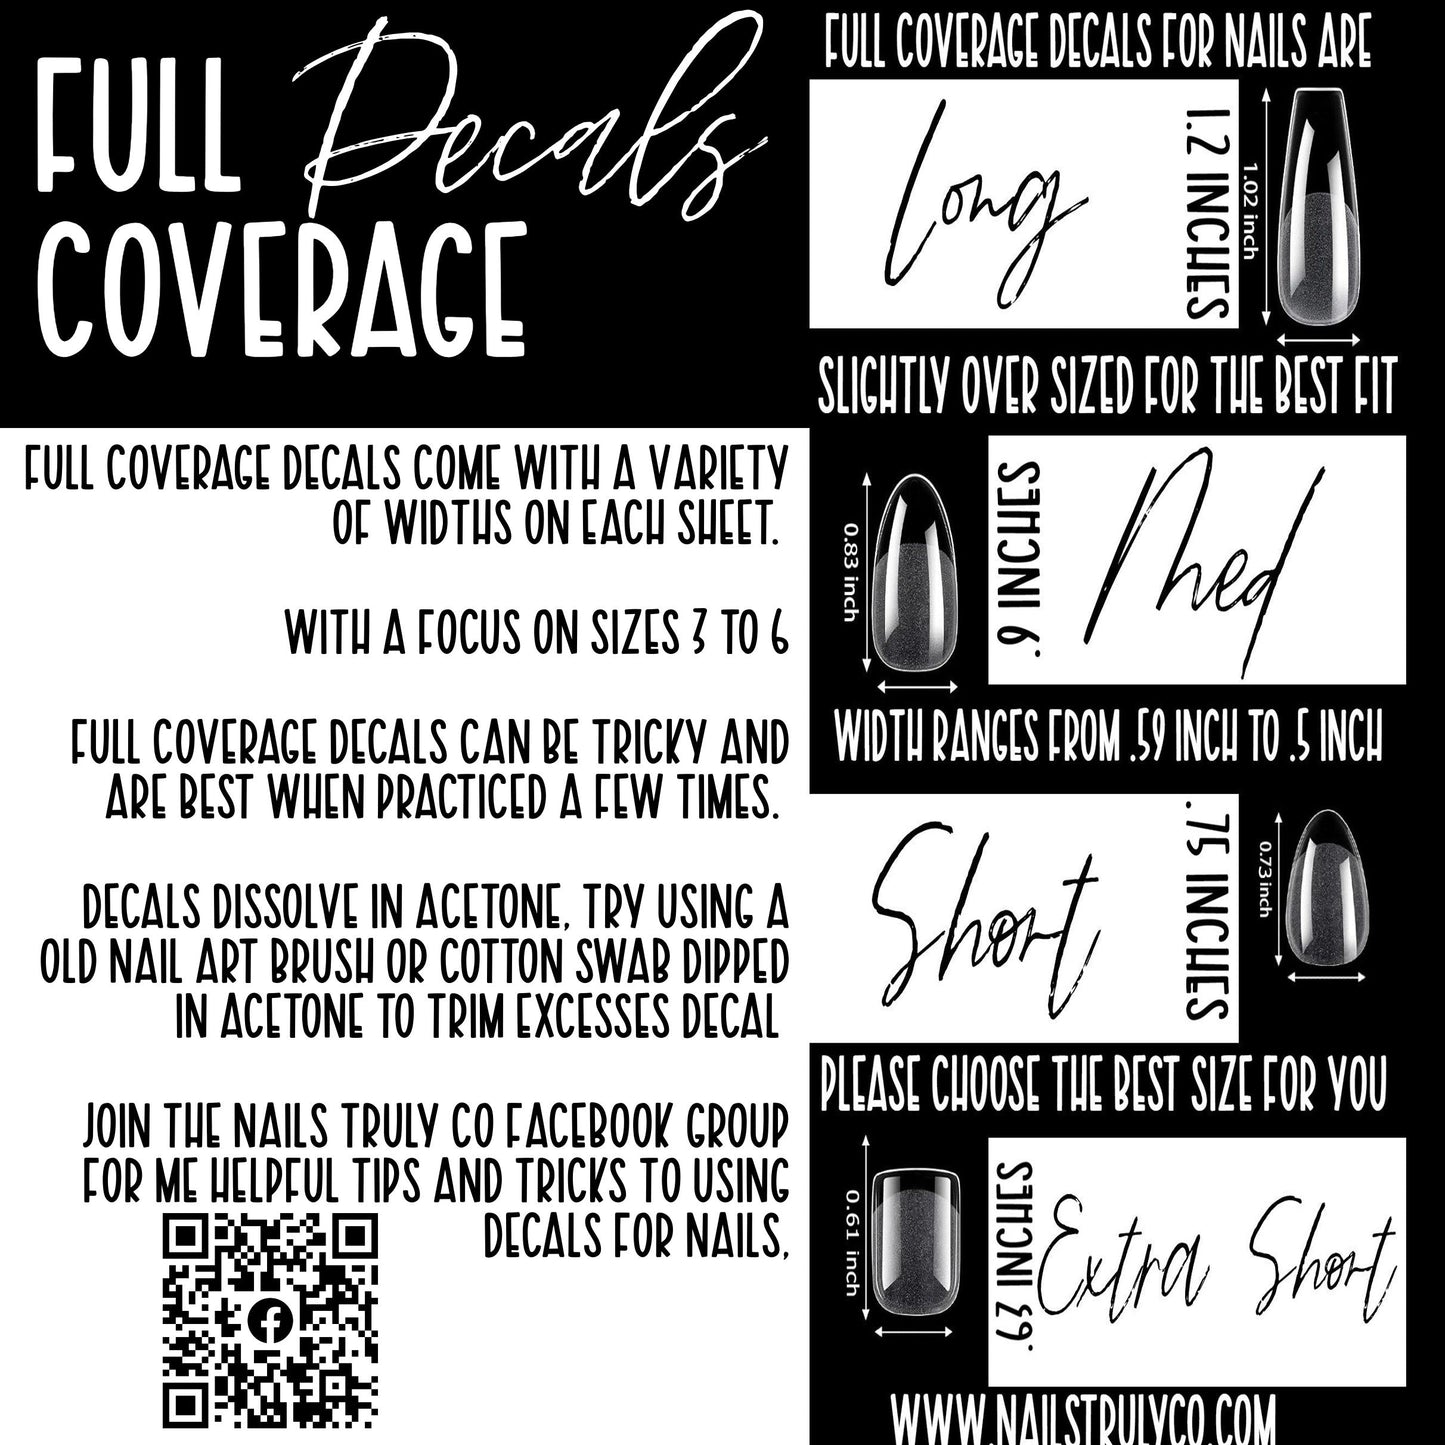 This Party Is On Spot!-  Full Coverage- Decals For Nails